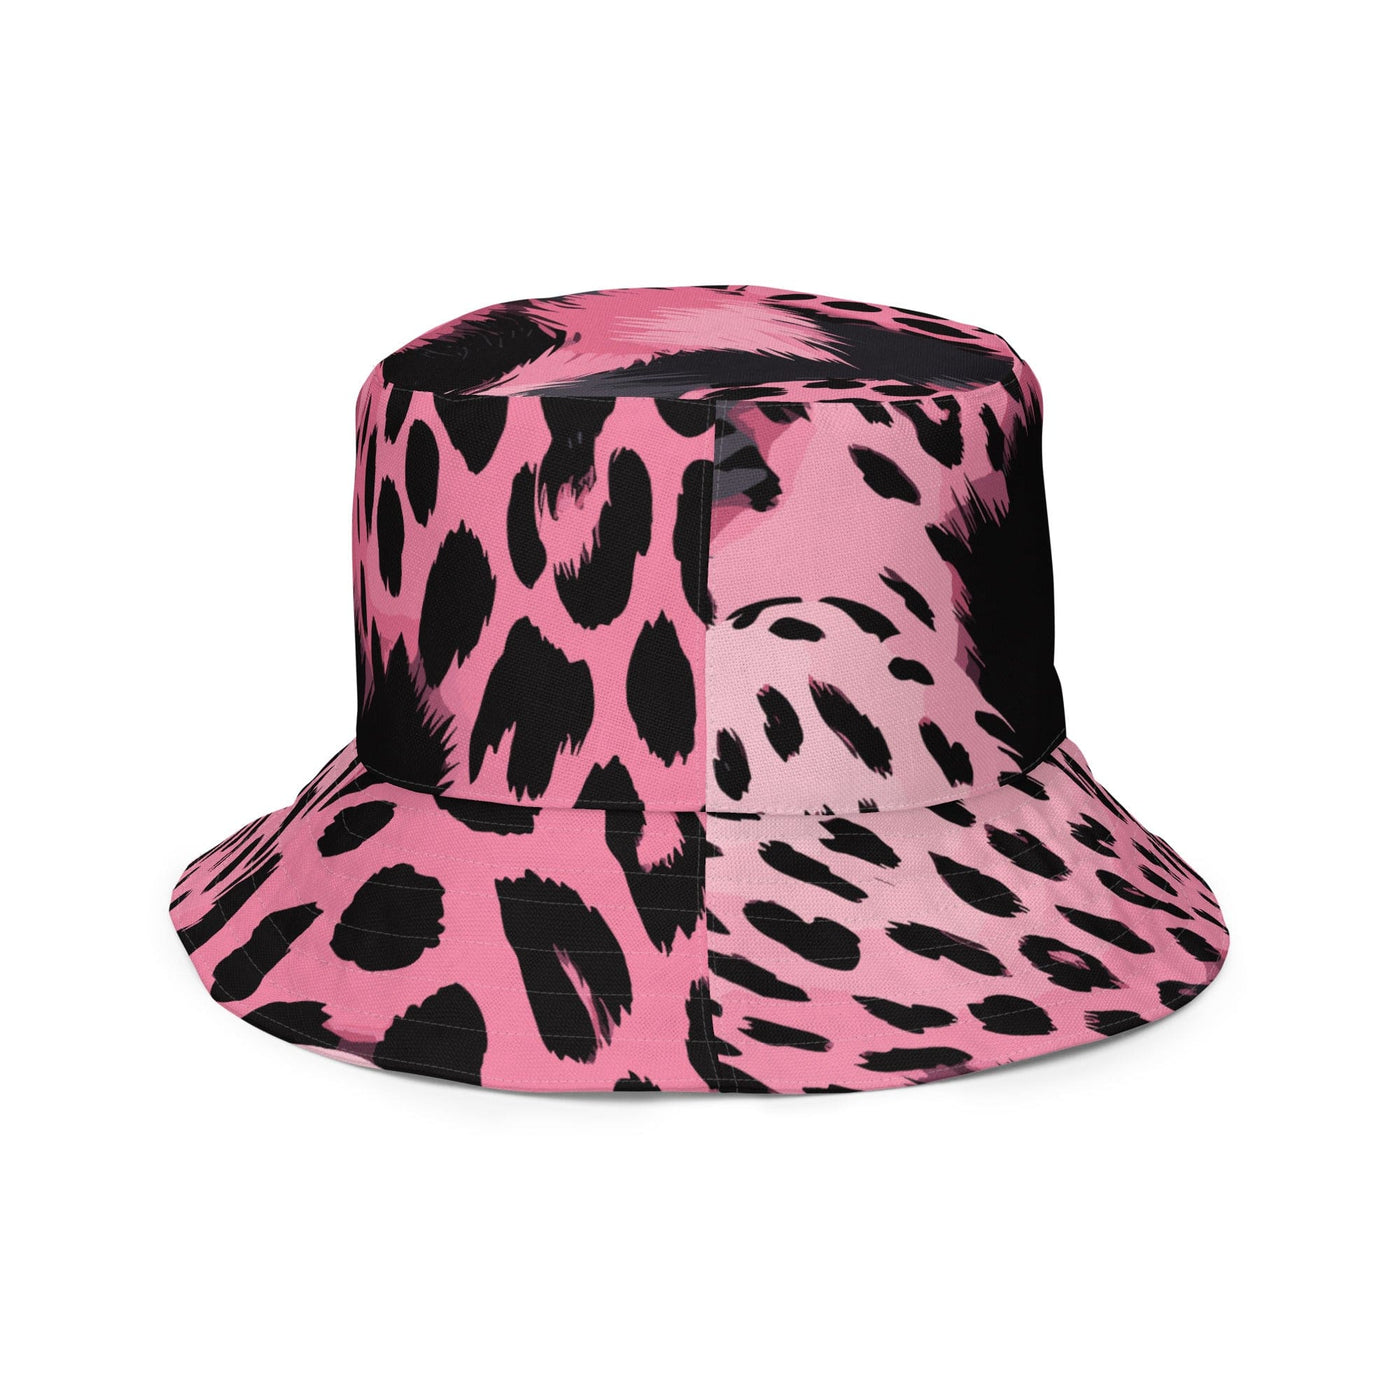 Reversible Bucket Hat Pink And Black Spotted Illustration